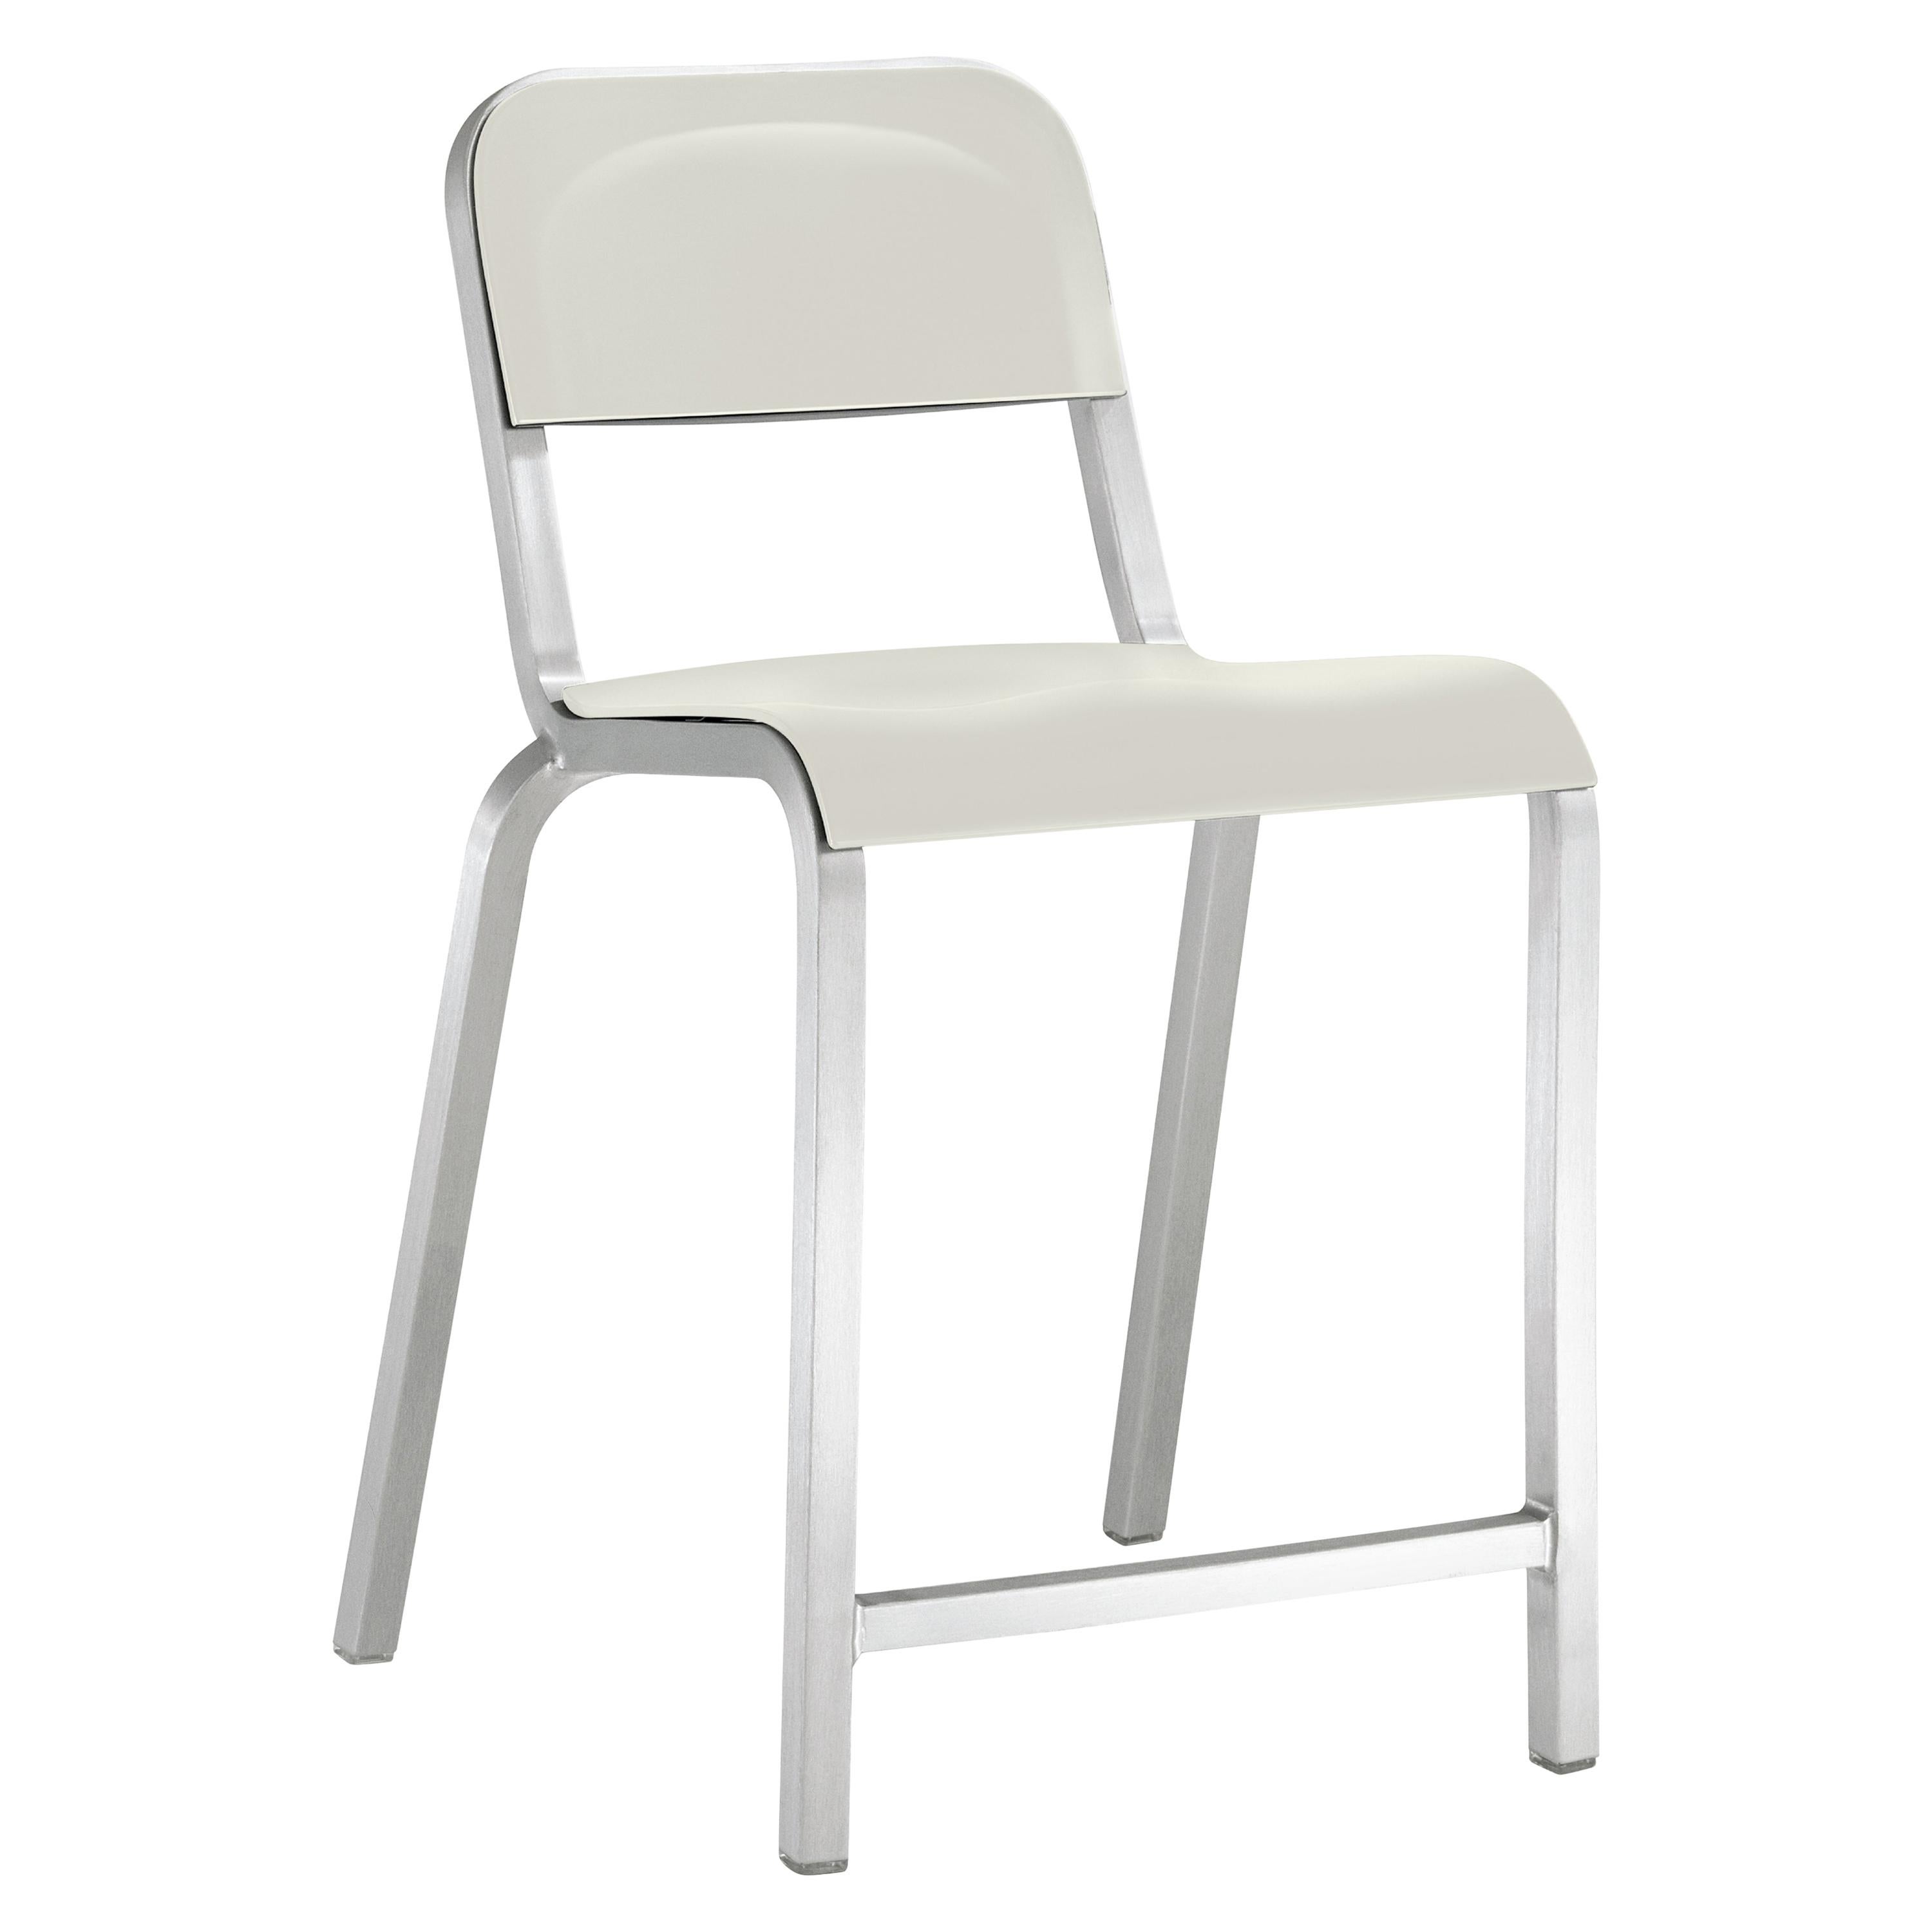 Emeco 1951 Aluminum Counter Stool with White Seat by Adrian Van Hooydonk For Sale